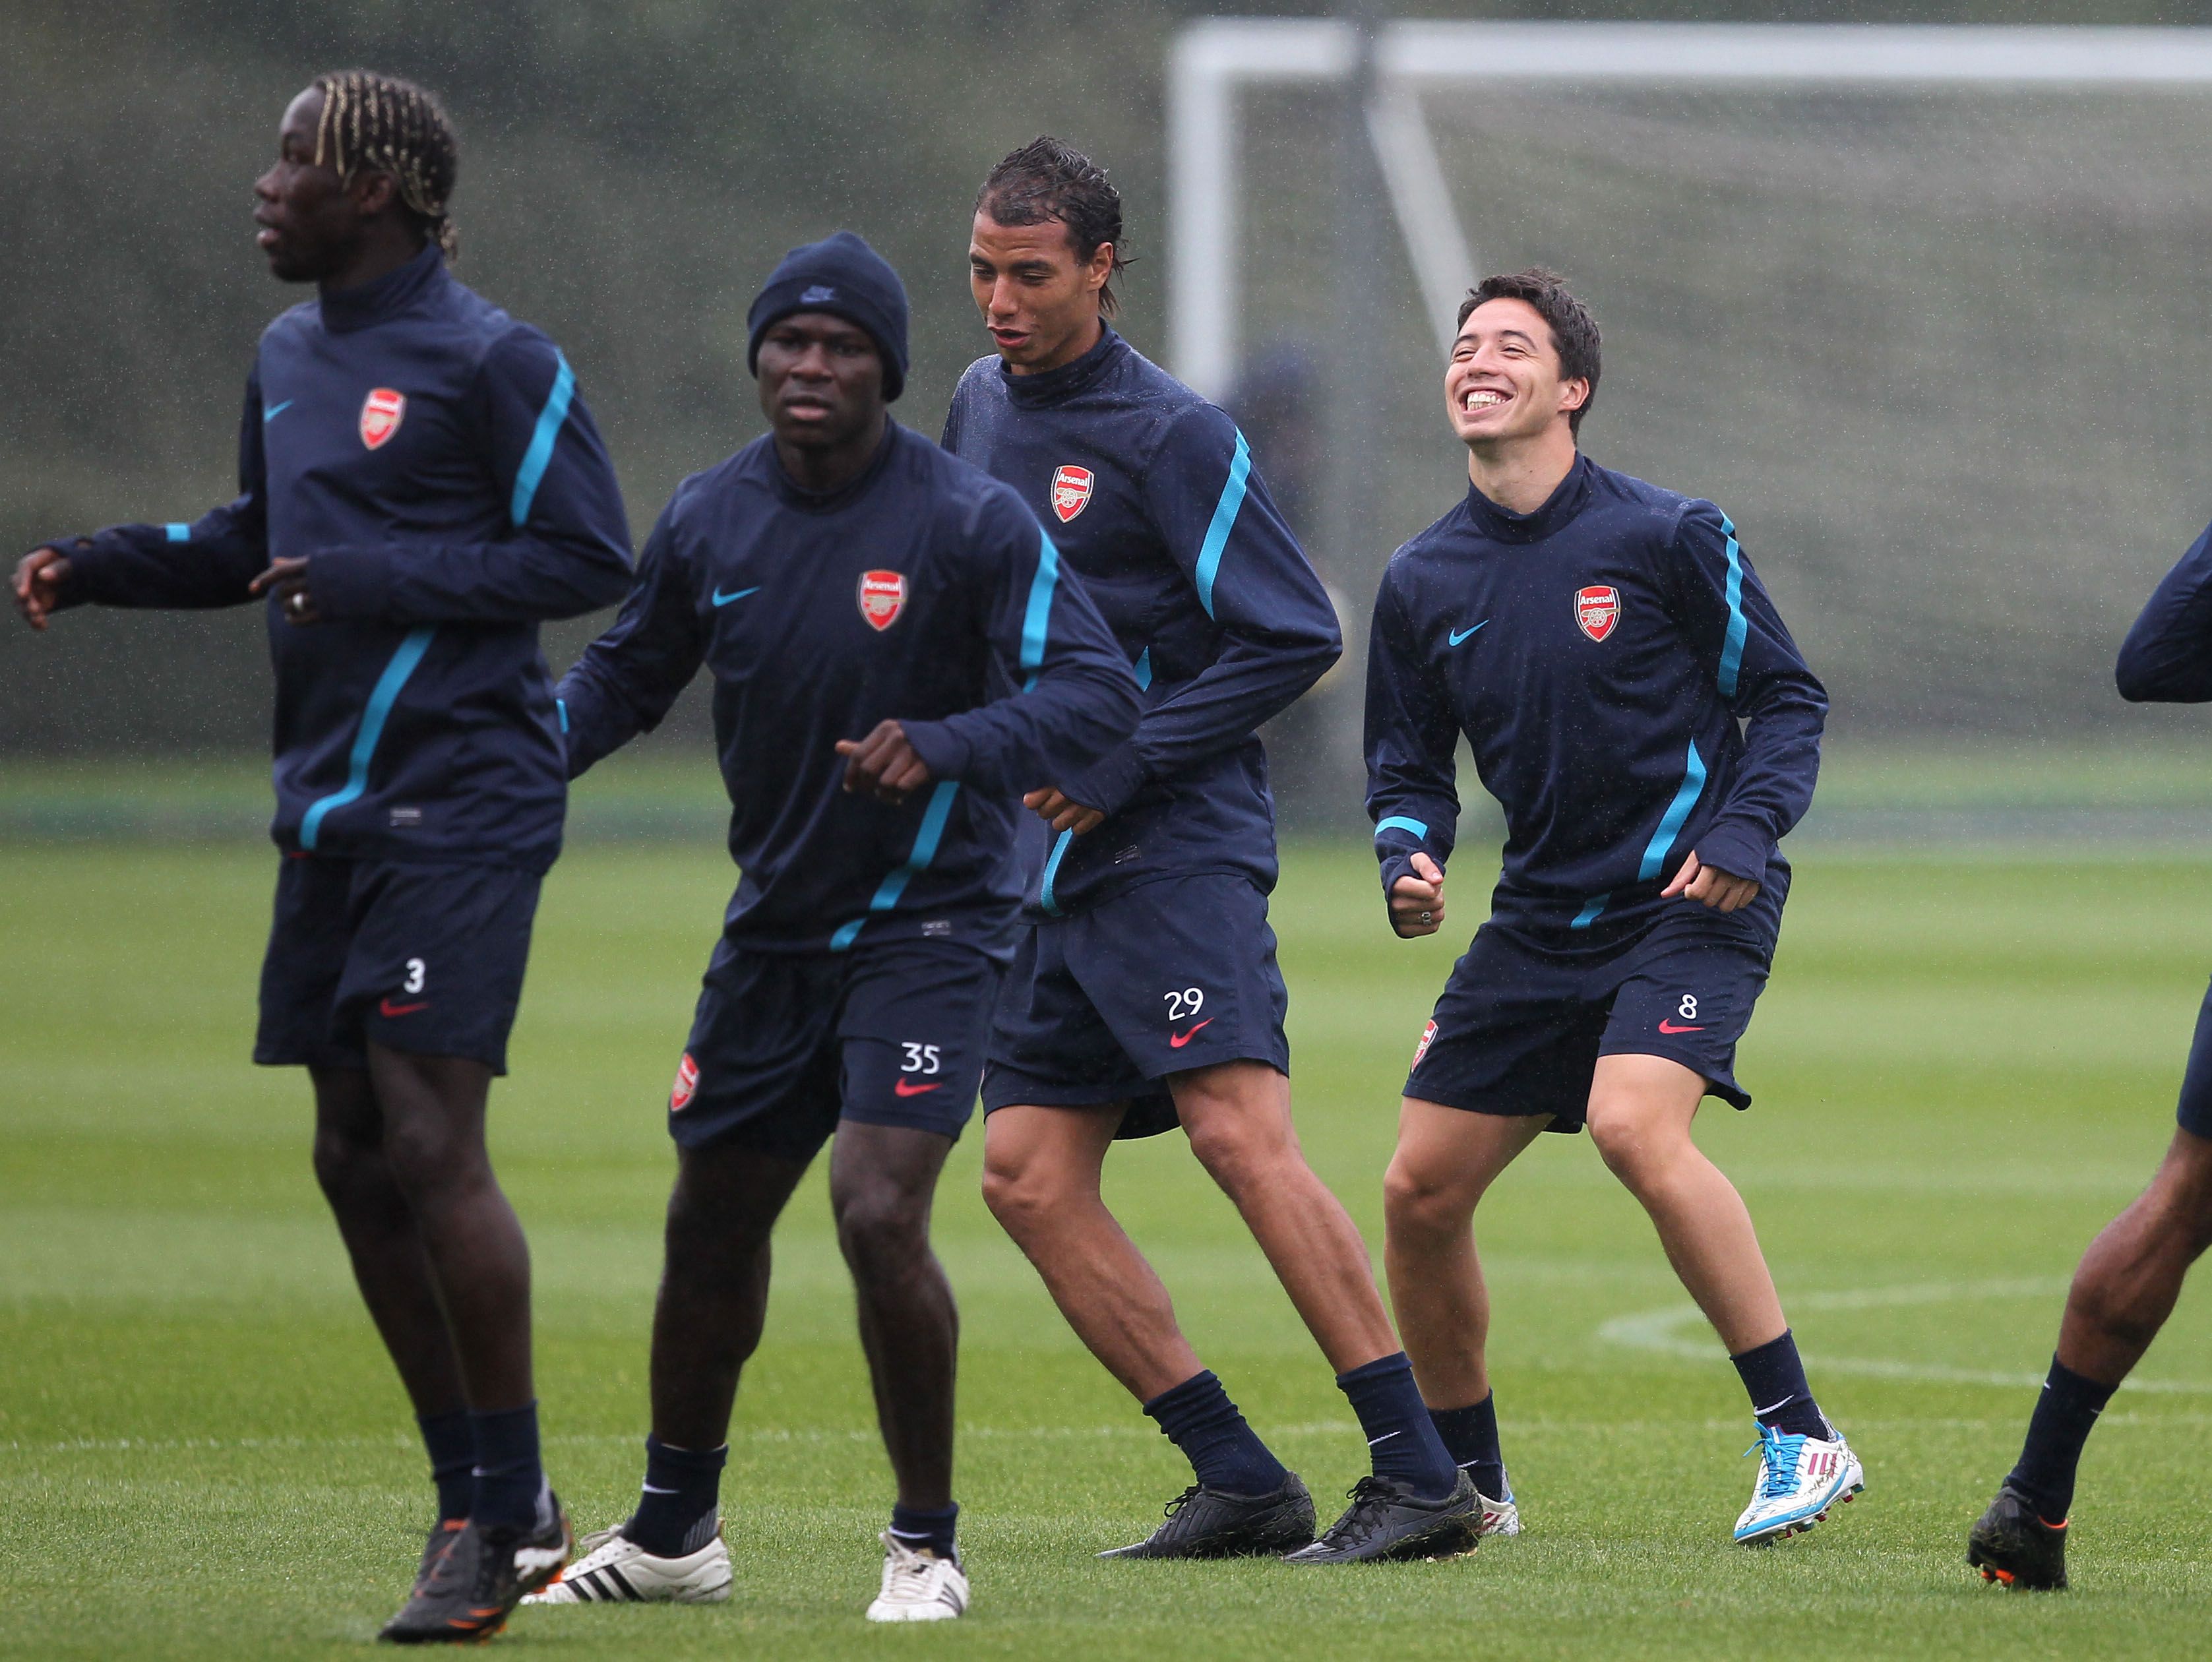 Emmanuel Frimpong (second from left) and Samir Nasri (right) in Arsenal training